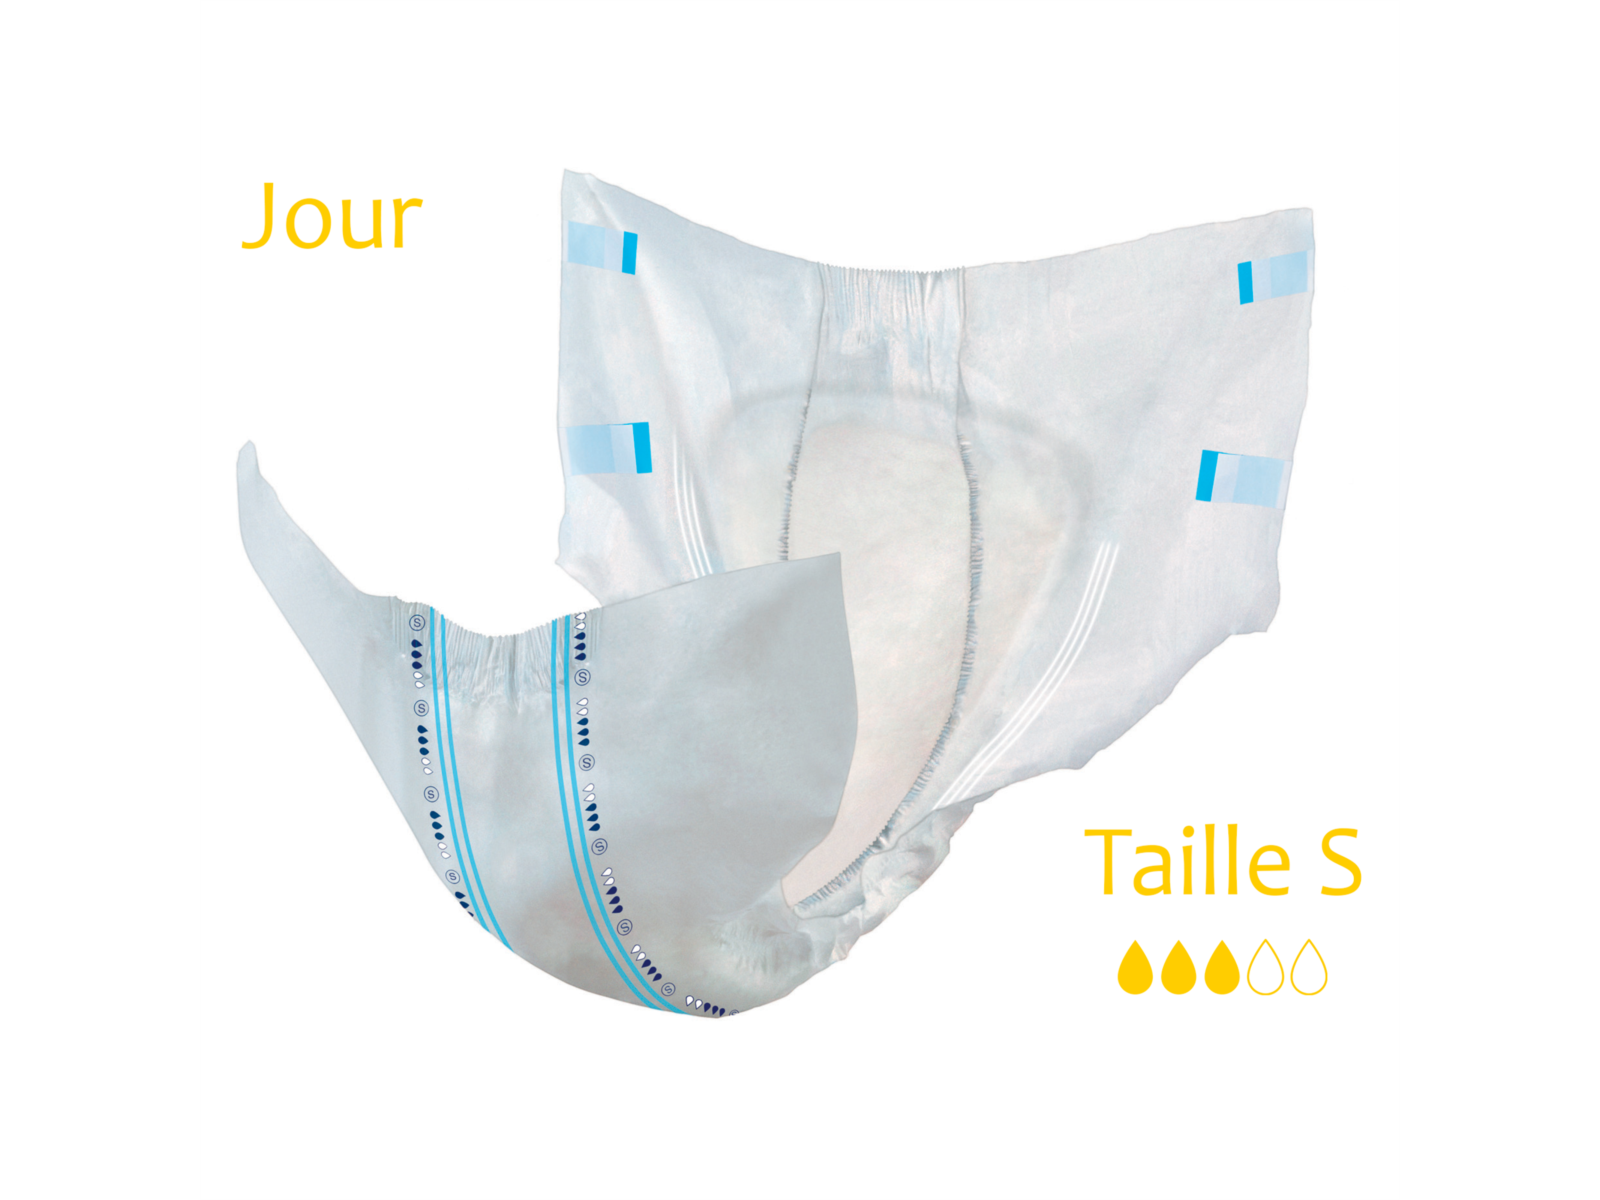 Change_complet_incontinence _gamme_jour_taille S